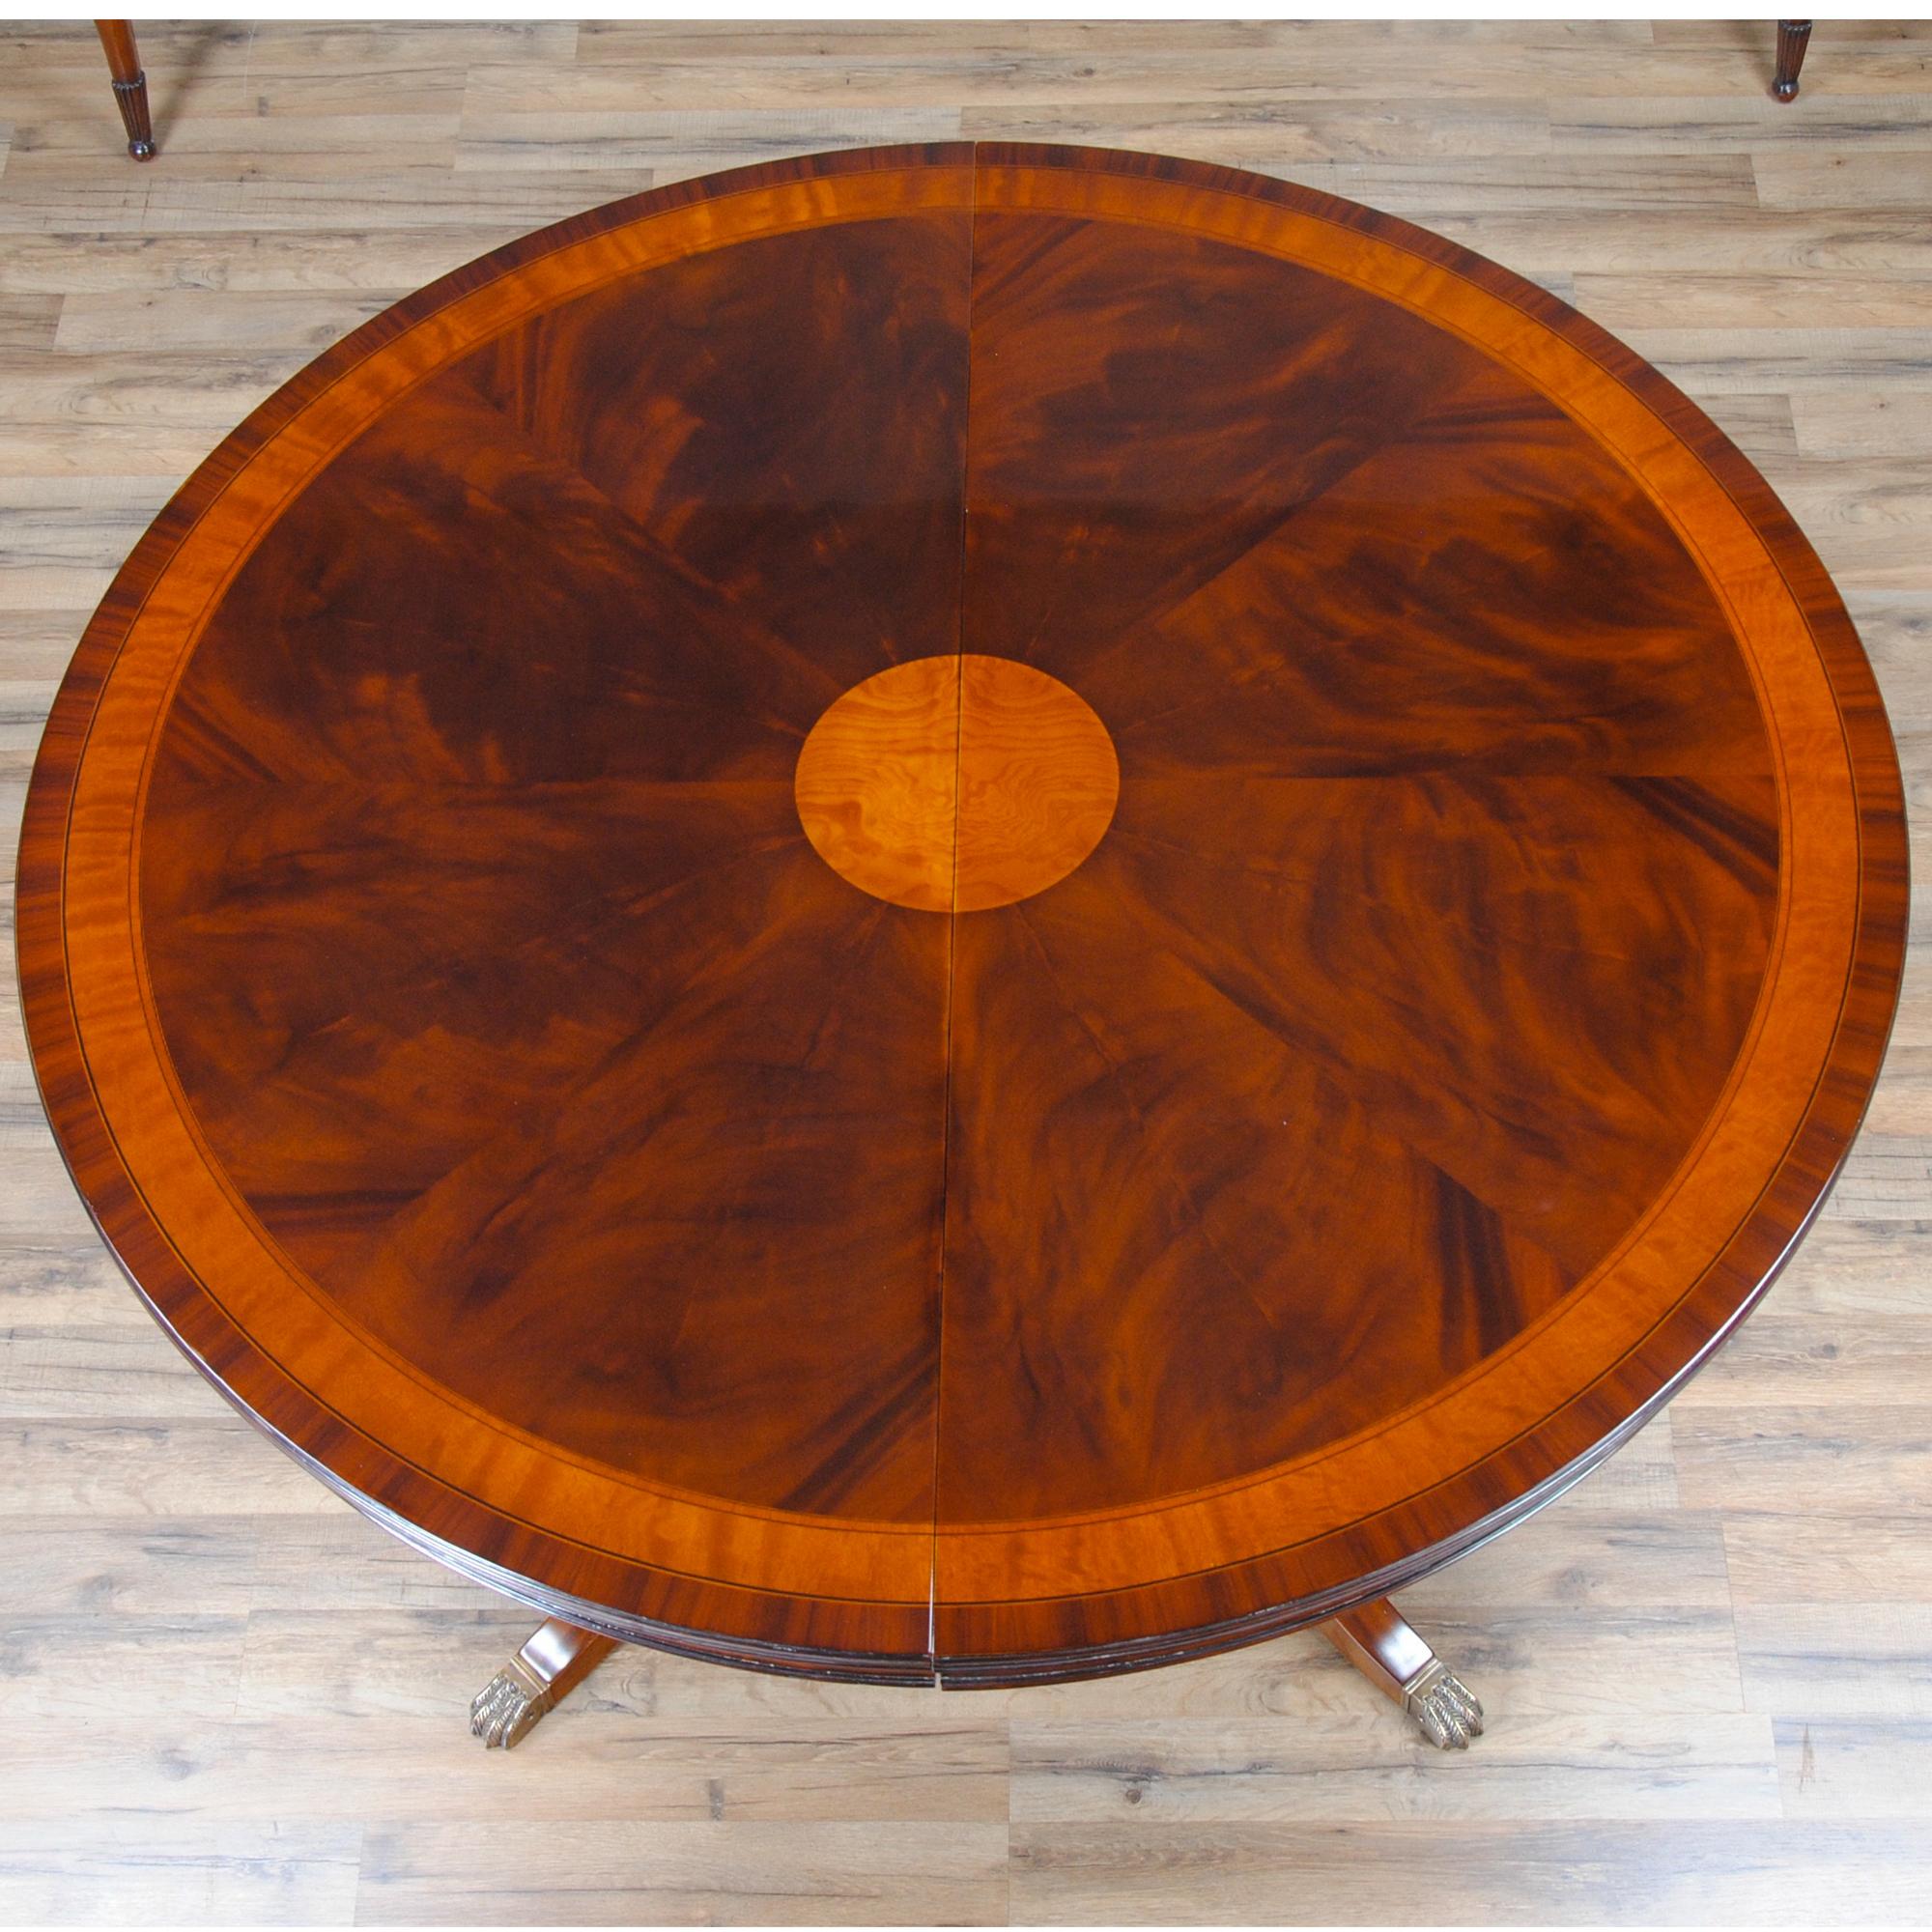 A popular version of the sized 54″-90″ Round Mahogany Table. When closed the table is 54″ round making it suitable for smaller, intimate dinner parties. With the two leaves are put in place the table opens to a maximum length of 90″ and  seating for